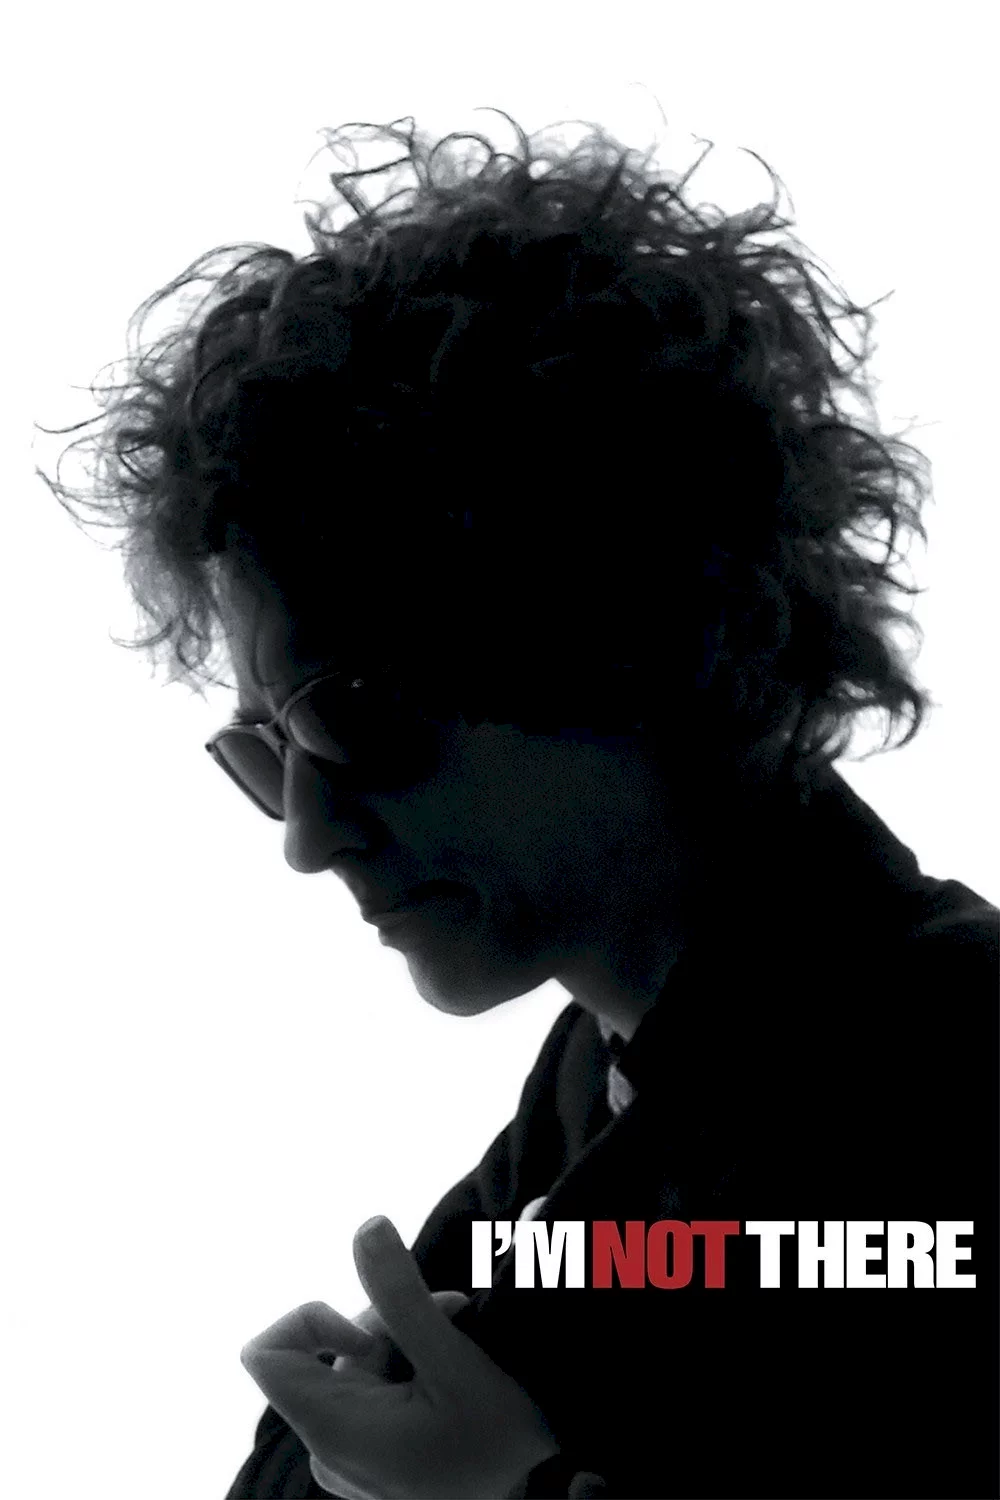 Photo du film : I'm not there